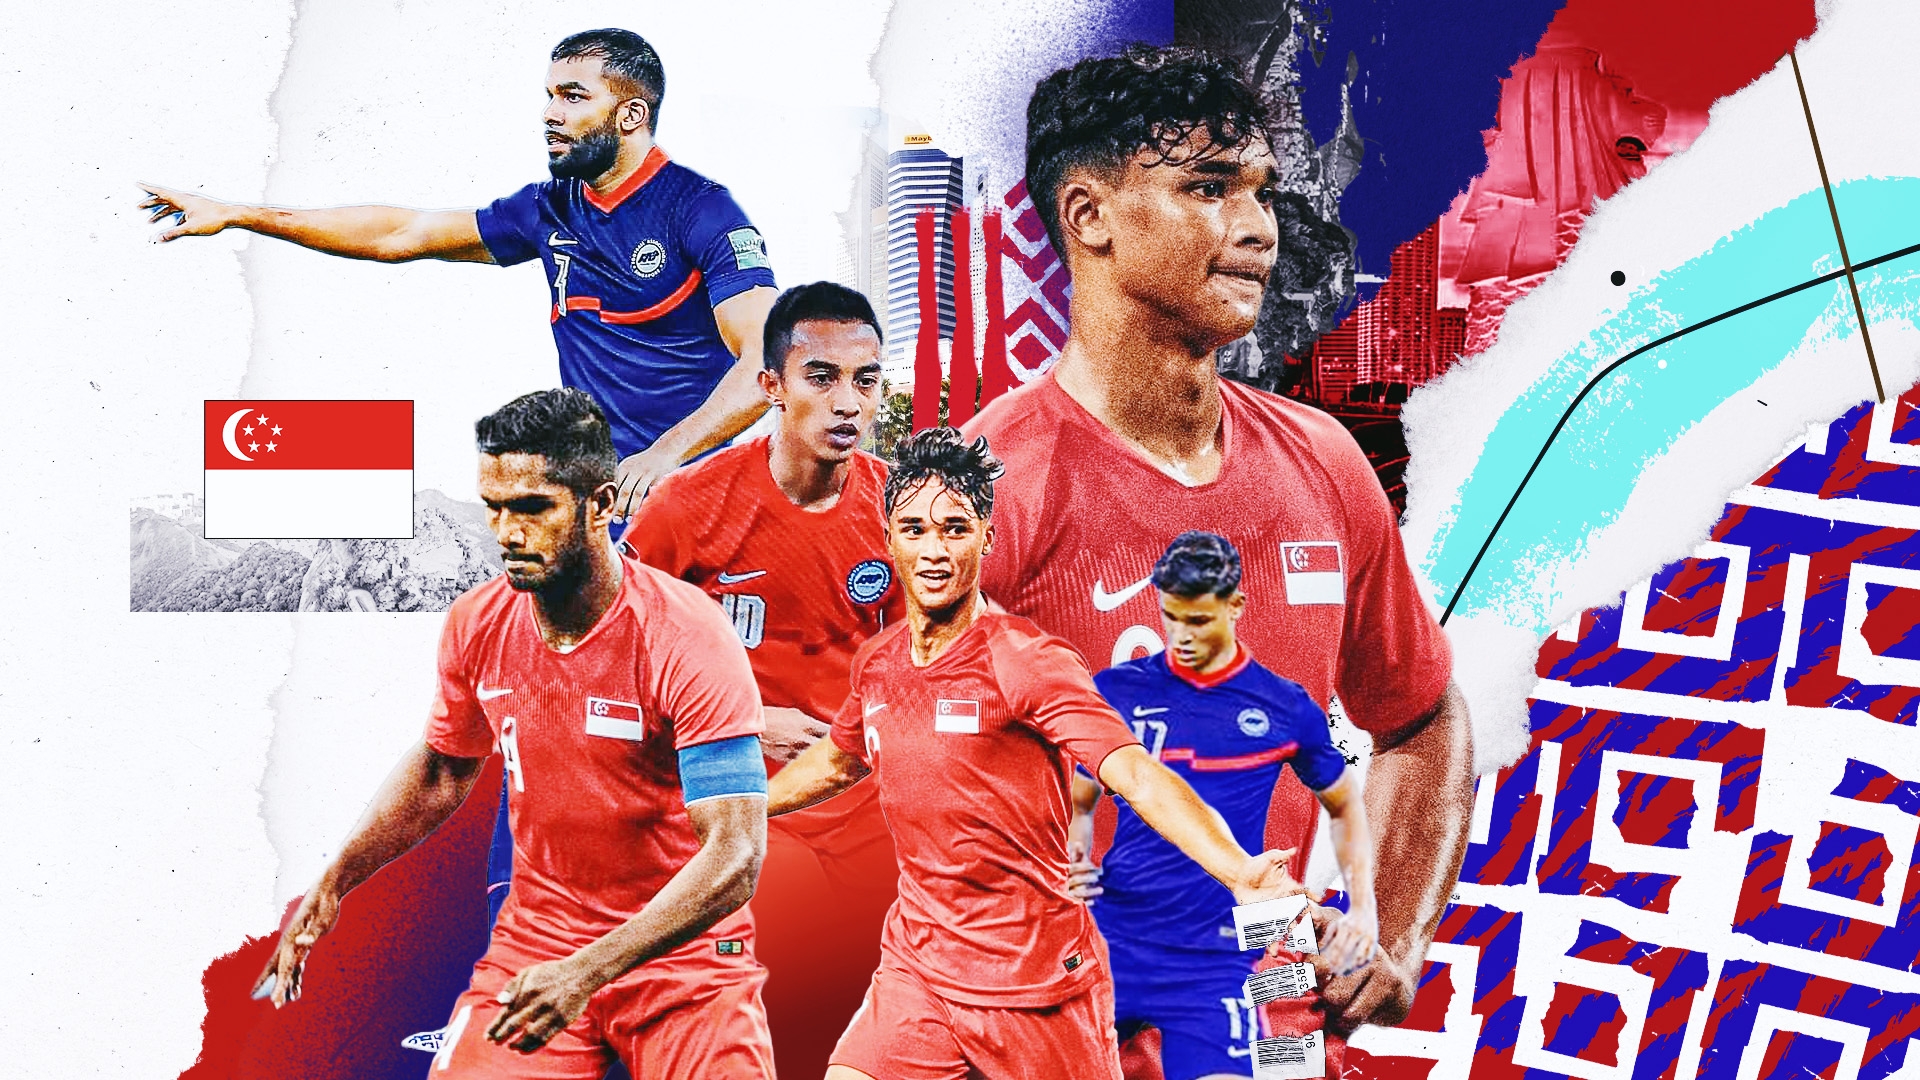 AFF Suzuki Cup 2021: Singapore squad, fixtures, results, table, TV schedule and online streams | Goal.com